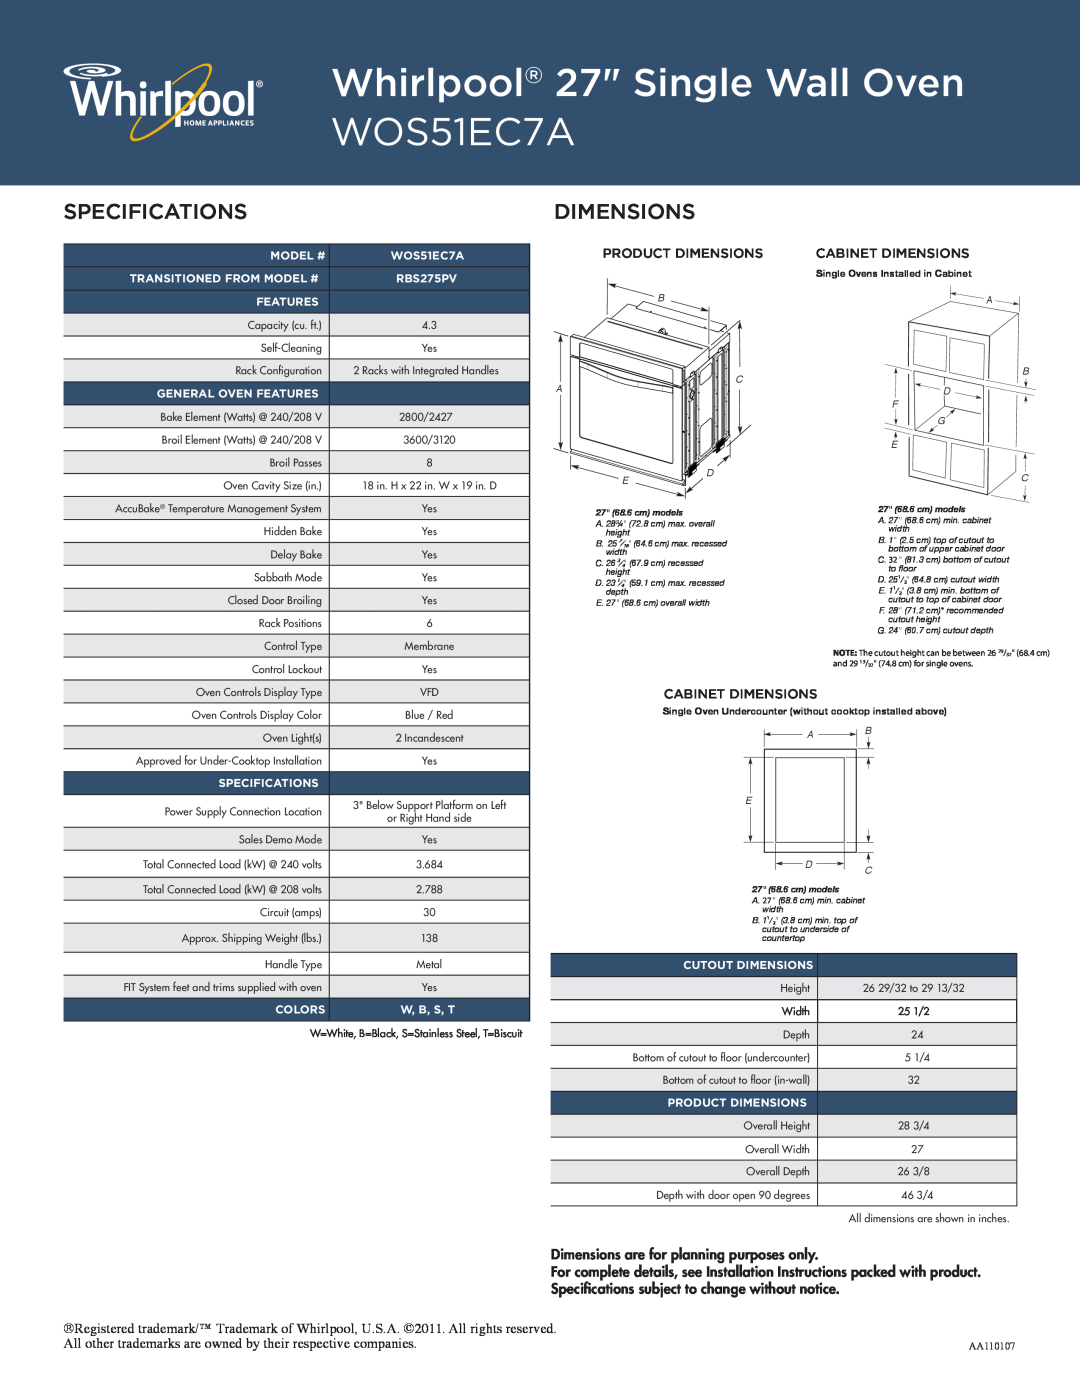 Whirlpool WOS51EC0A manual Product Dimensions, Cabinet Dimensions, Whirlpool 27 Single Wall Oven WOS51EC7A, Specifications 